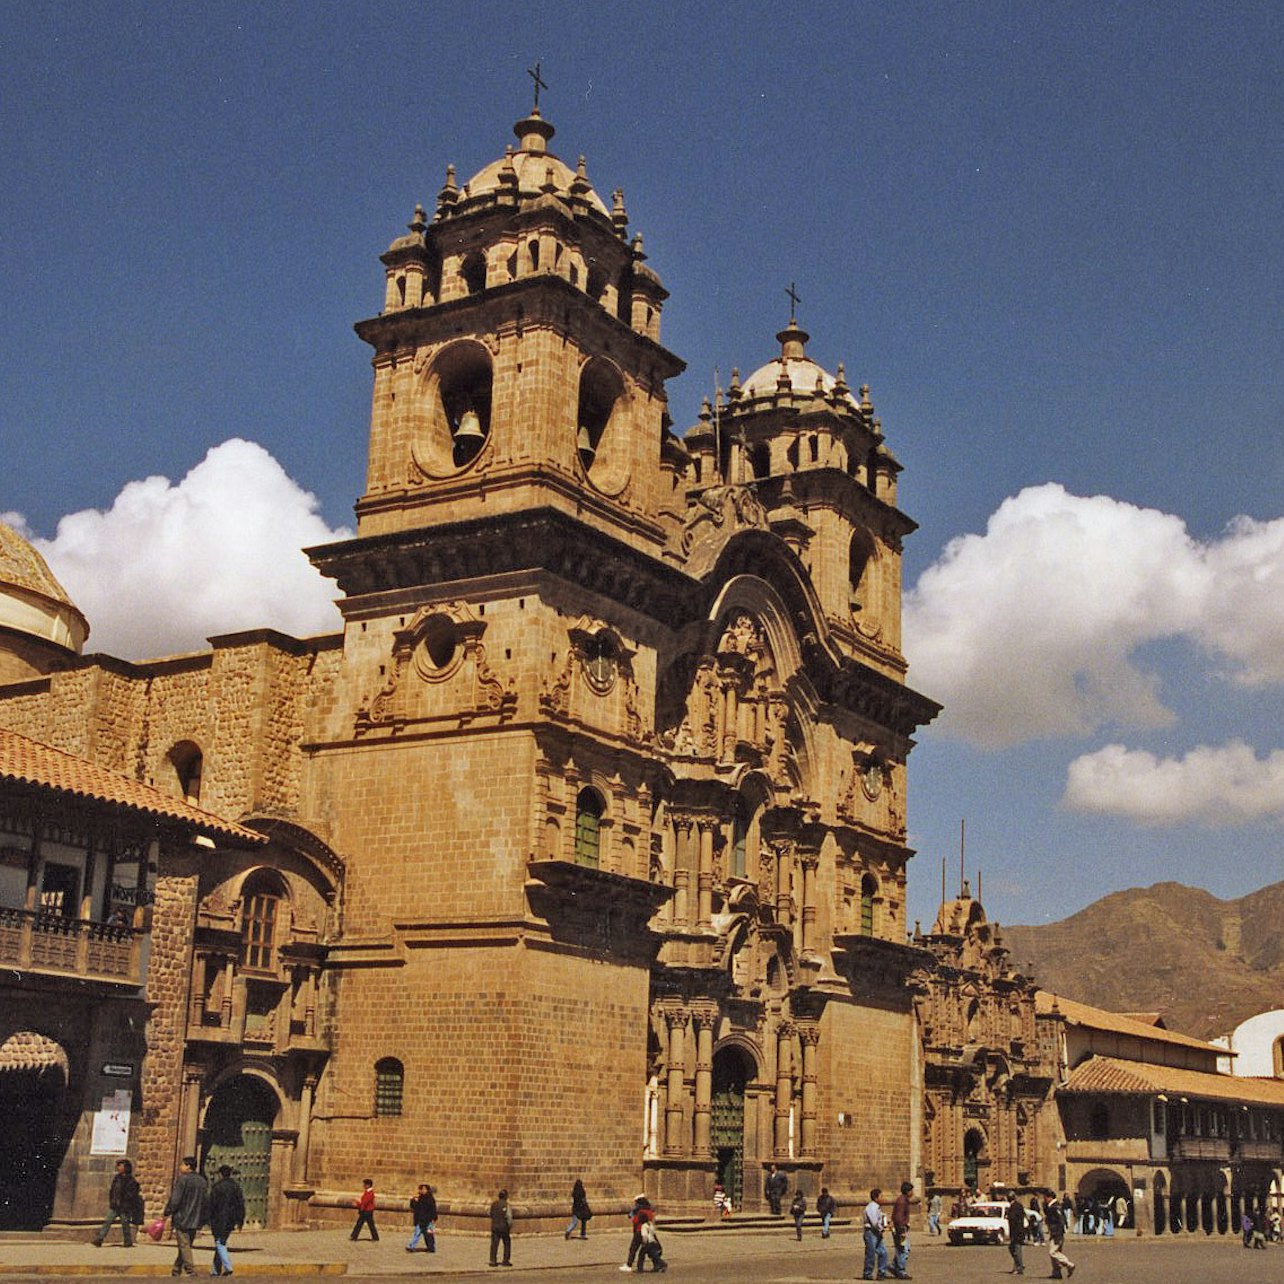 Church of the Society of Jesus - Accommodations in Cuzco